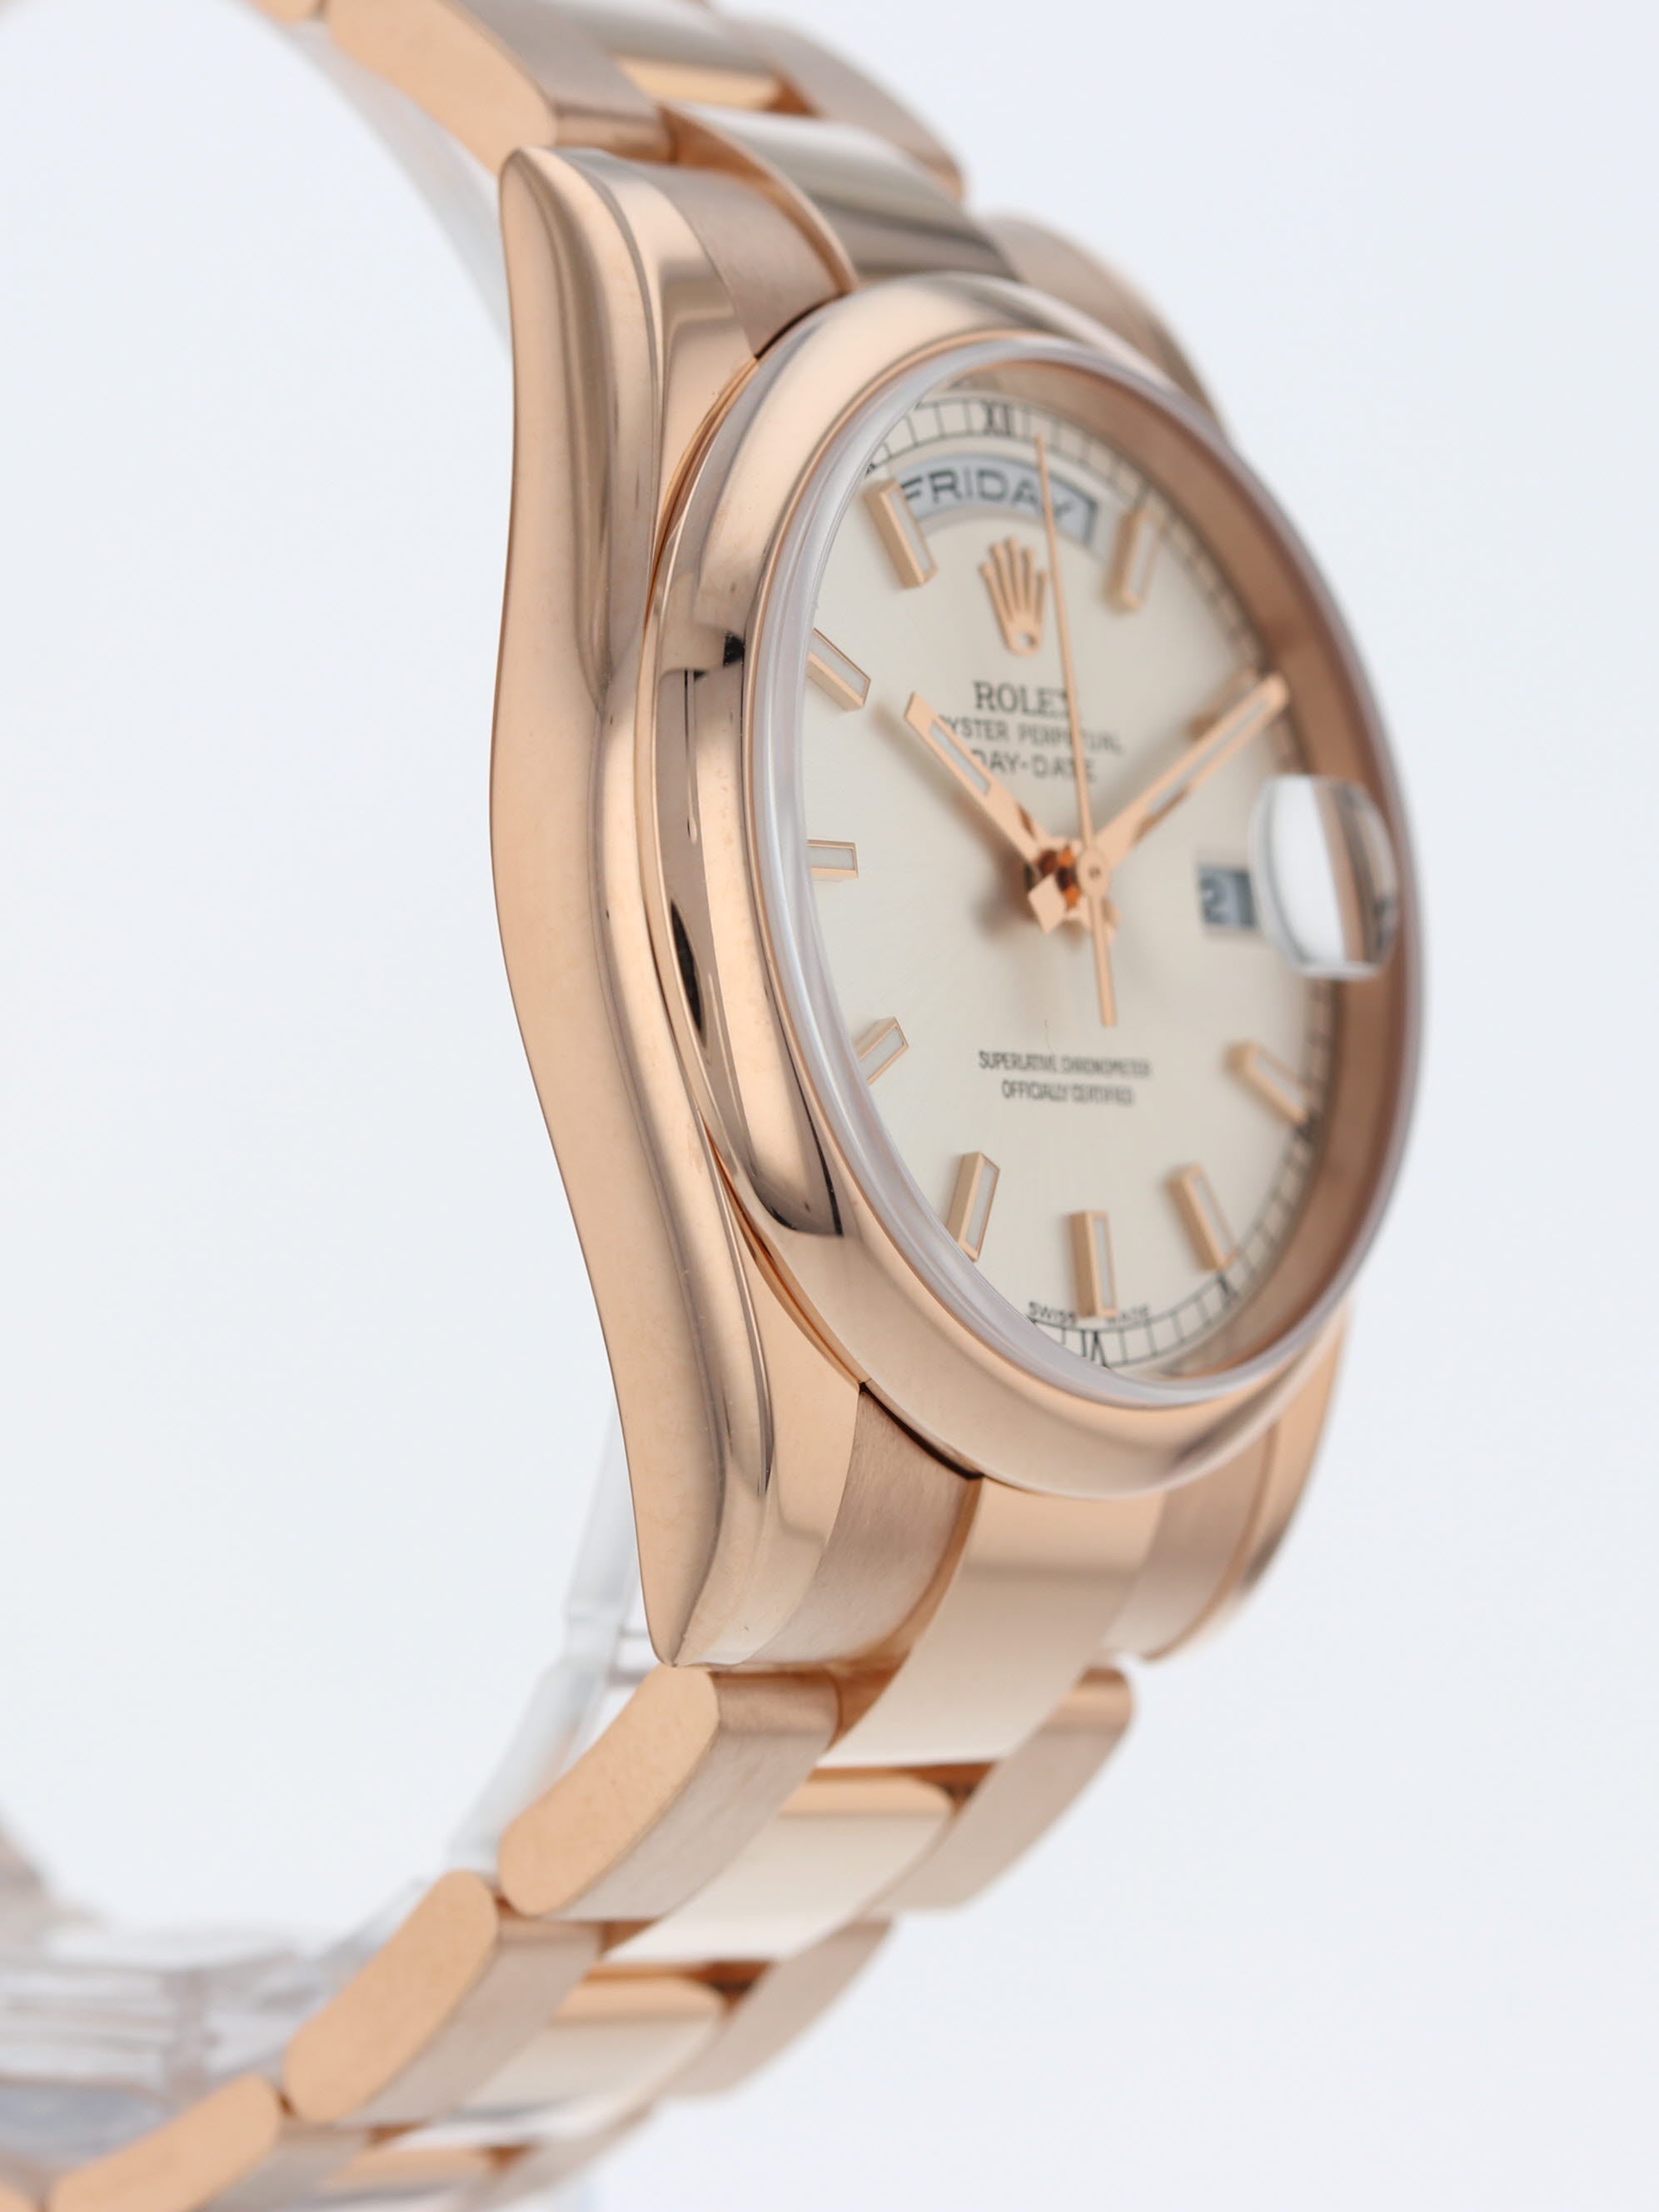 39267: Rolex 18k Rose Gold Day-Date, Ref. 118205, Box and 2009 